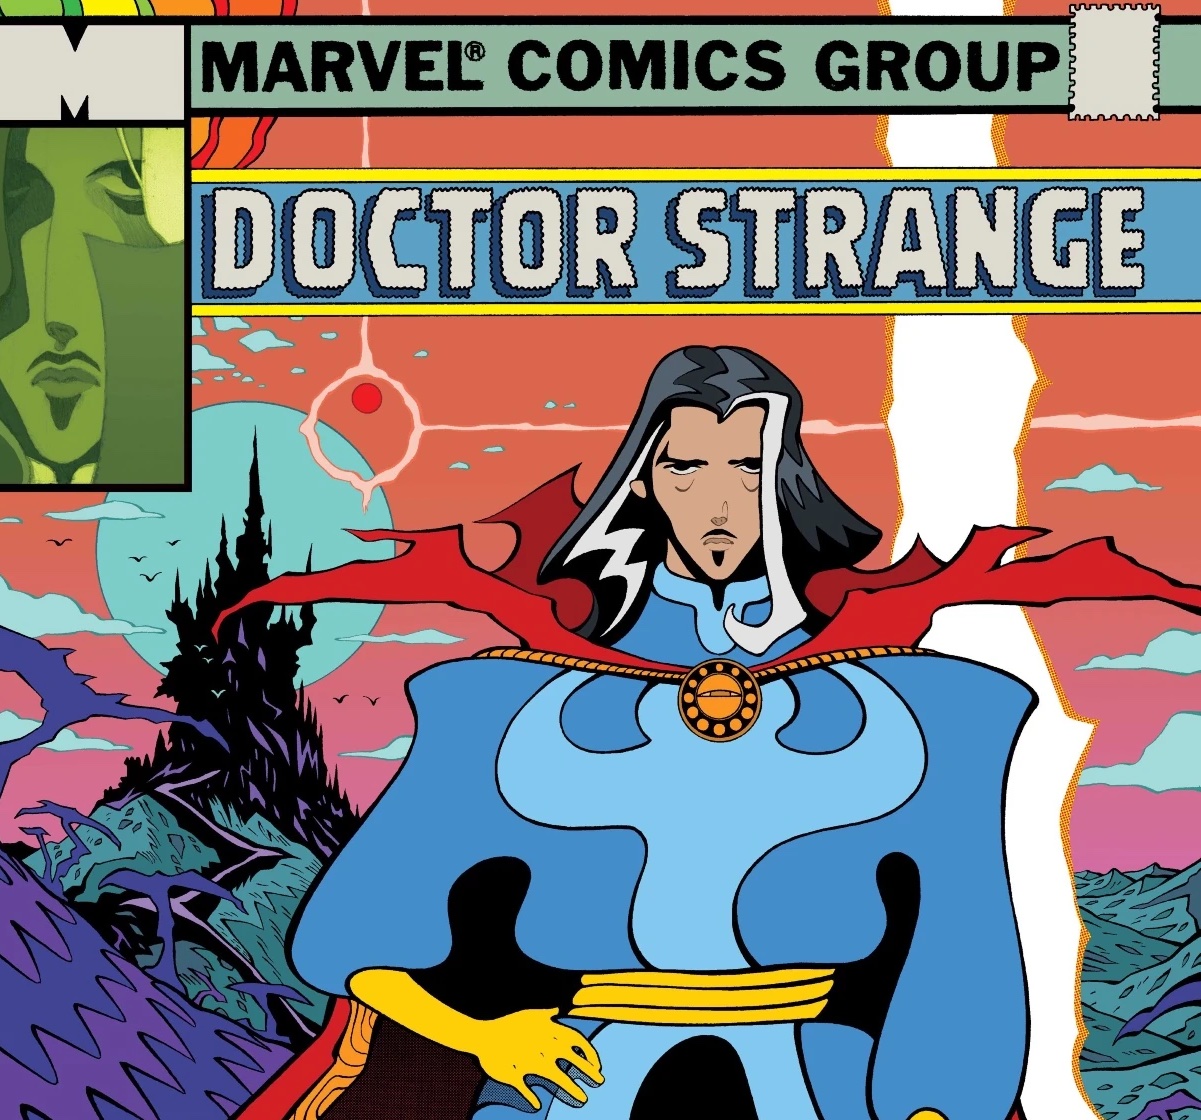 'Doctor Strange: Fall Sunrise' #1 may be the trippiest story Marvel has ever told